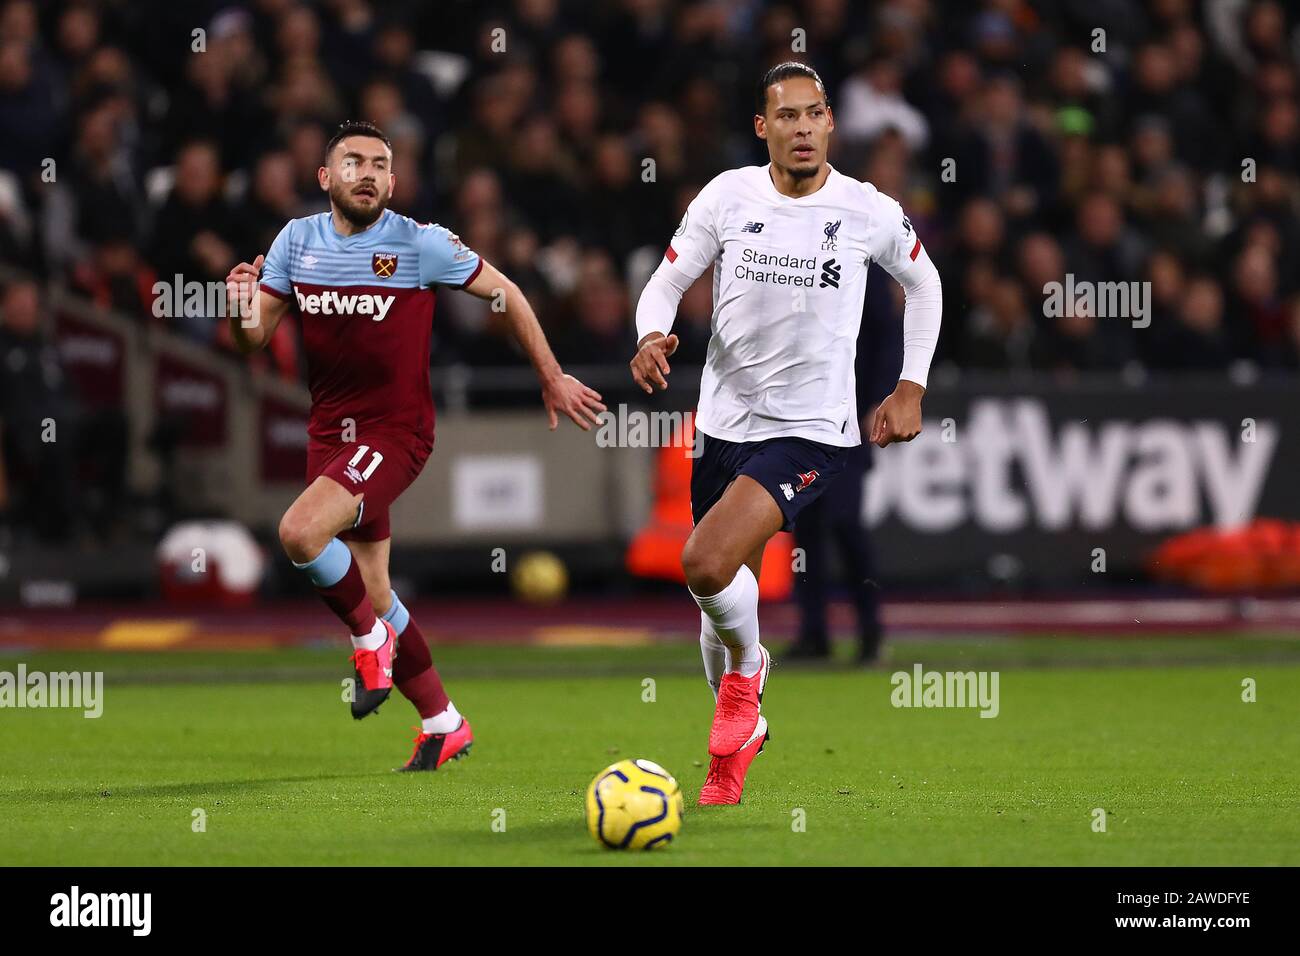 Virgil van Dijk of Liverpool and Robert Snodgrass of West Ham United in  action during the Premier League match between West Ham United and  Liverpool at London Stadium.(Final Score; West Ham United